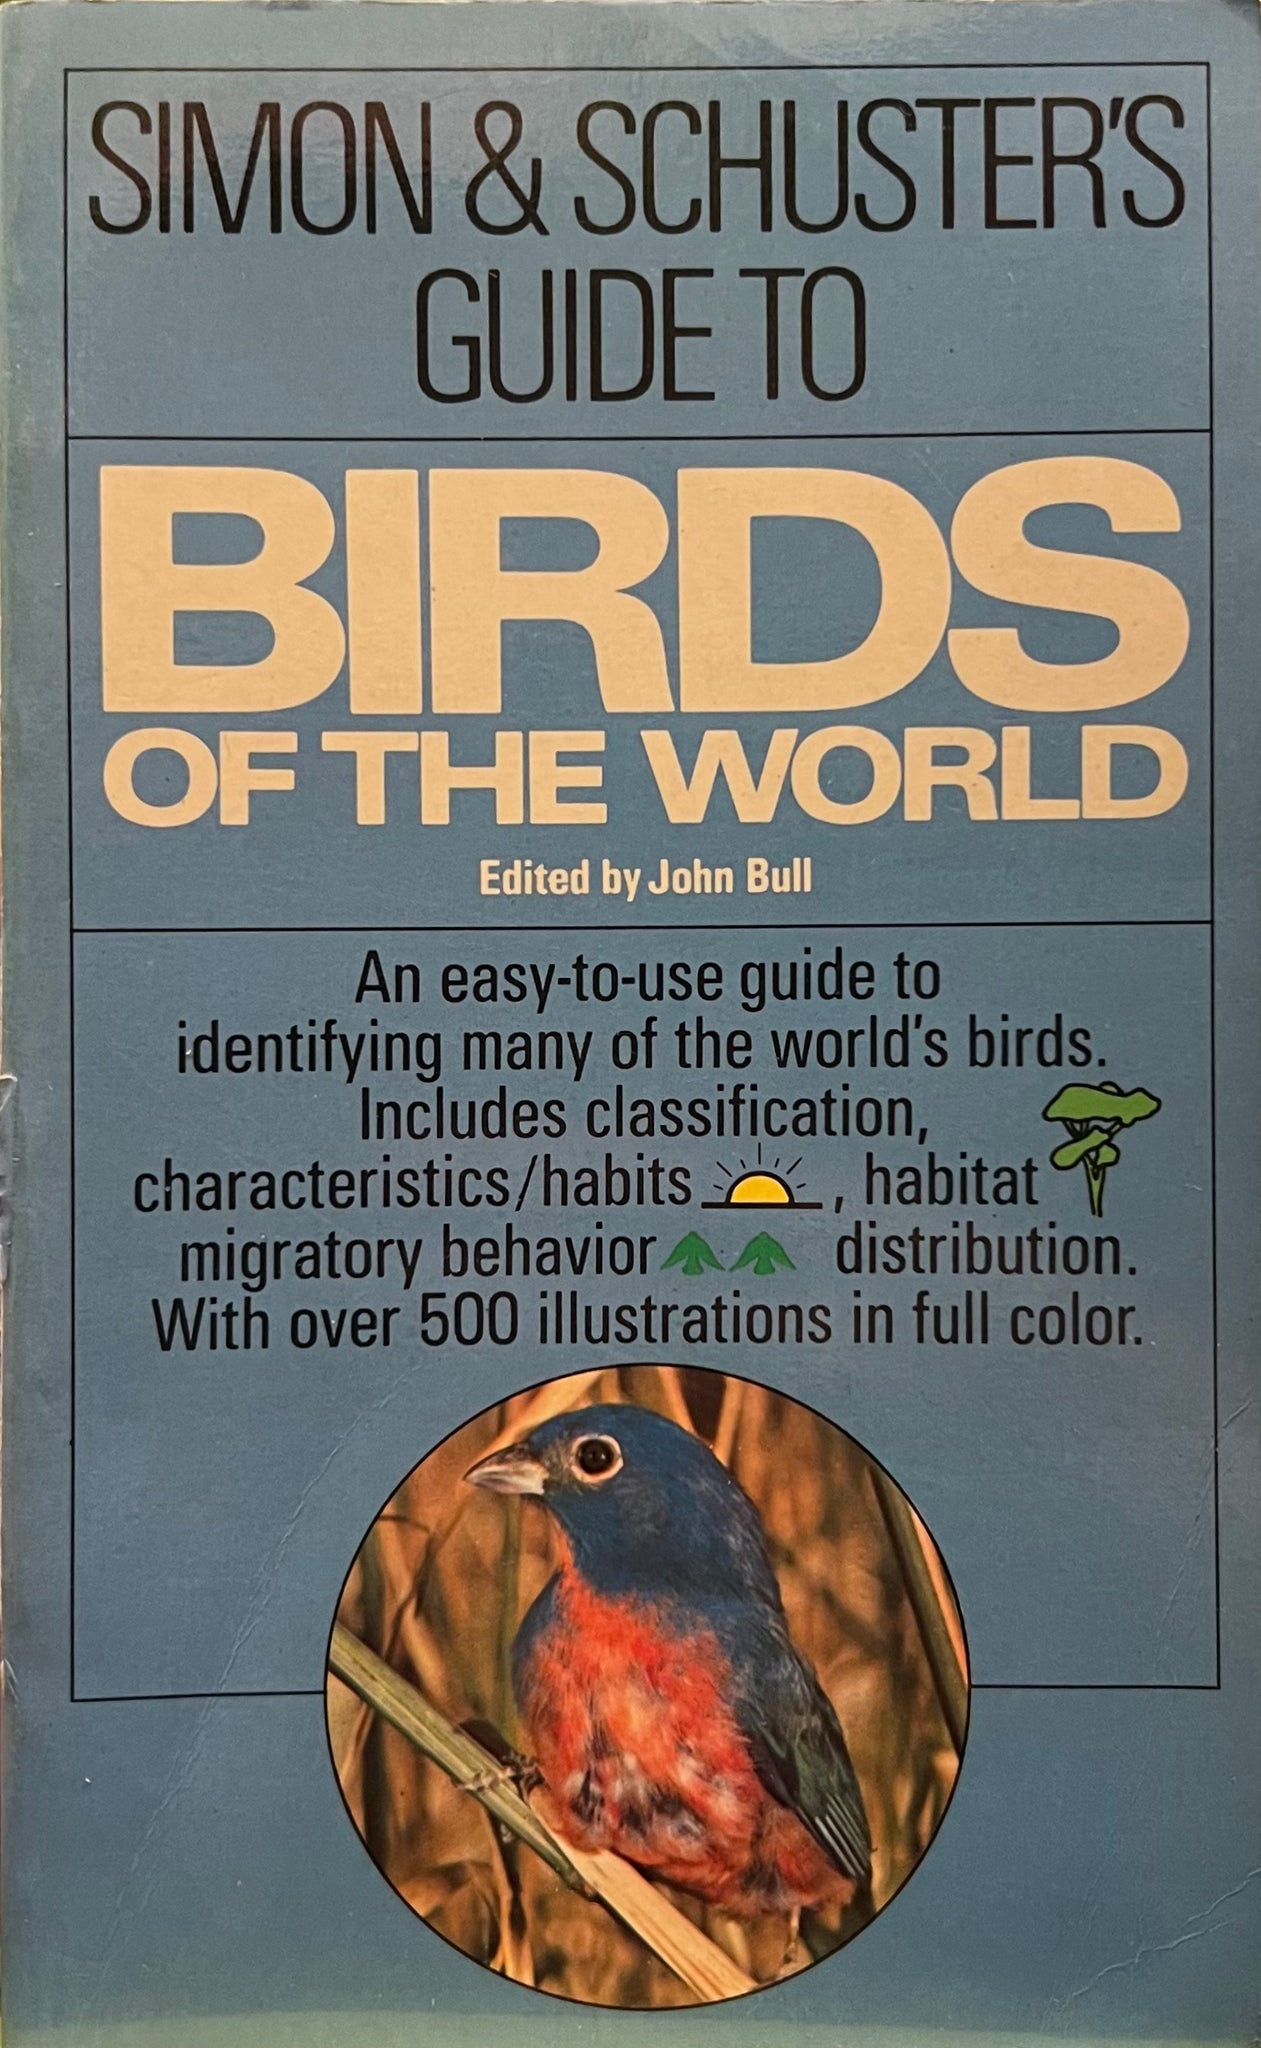 Simon and Schuster’s Guide to Birds of the World, Gianfranco Bologna, Edited by John Bull